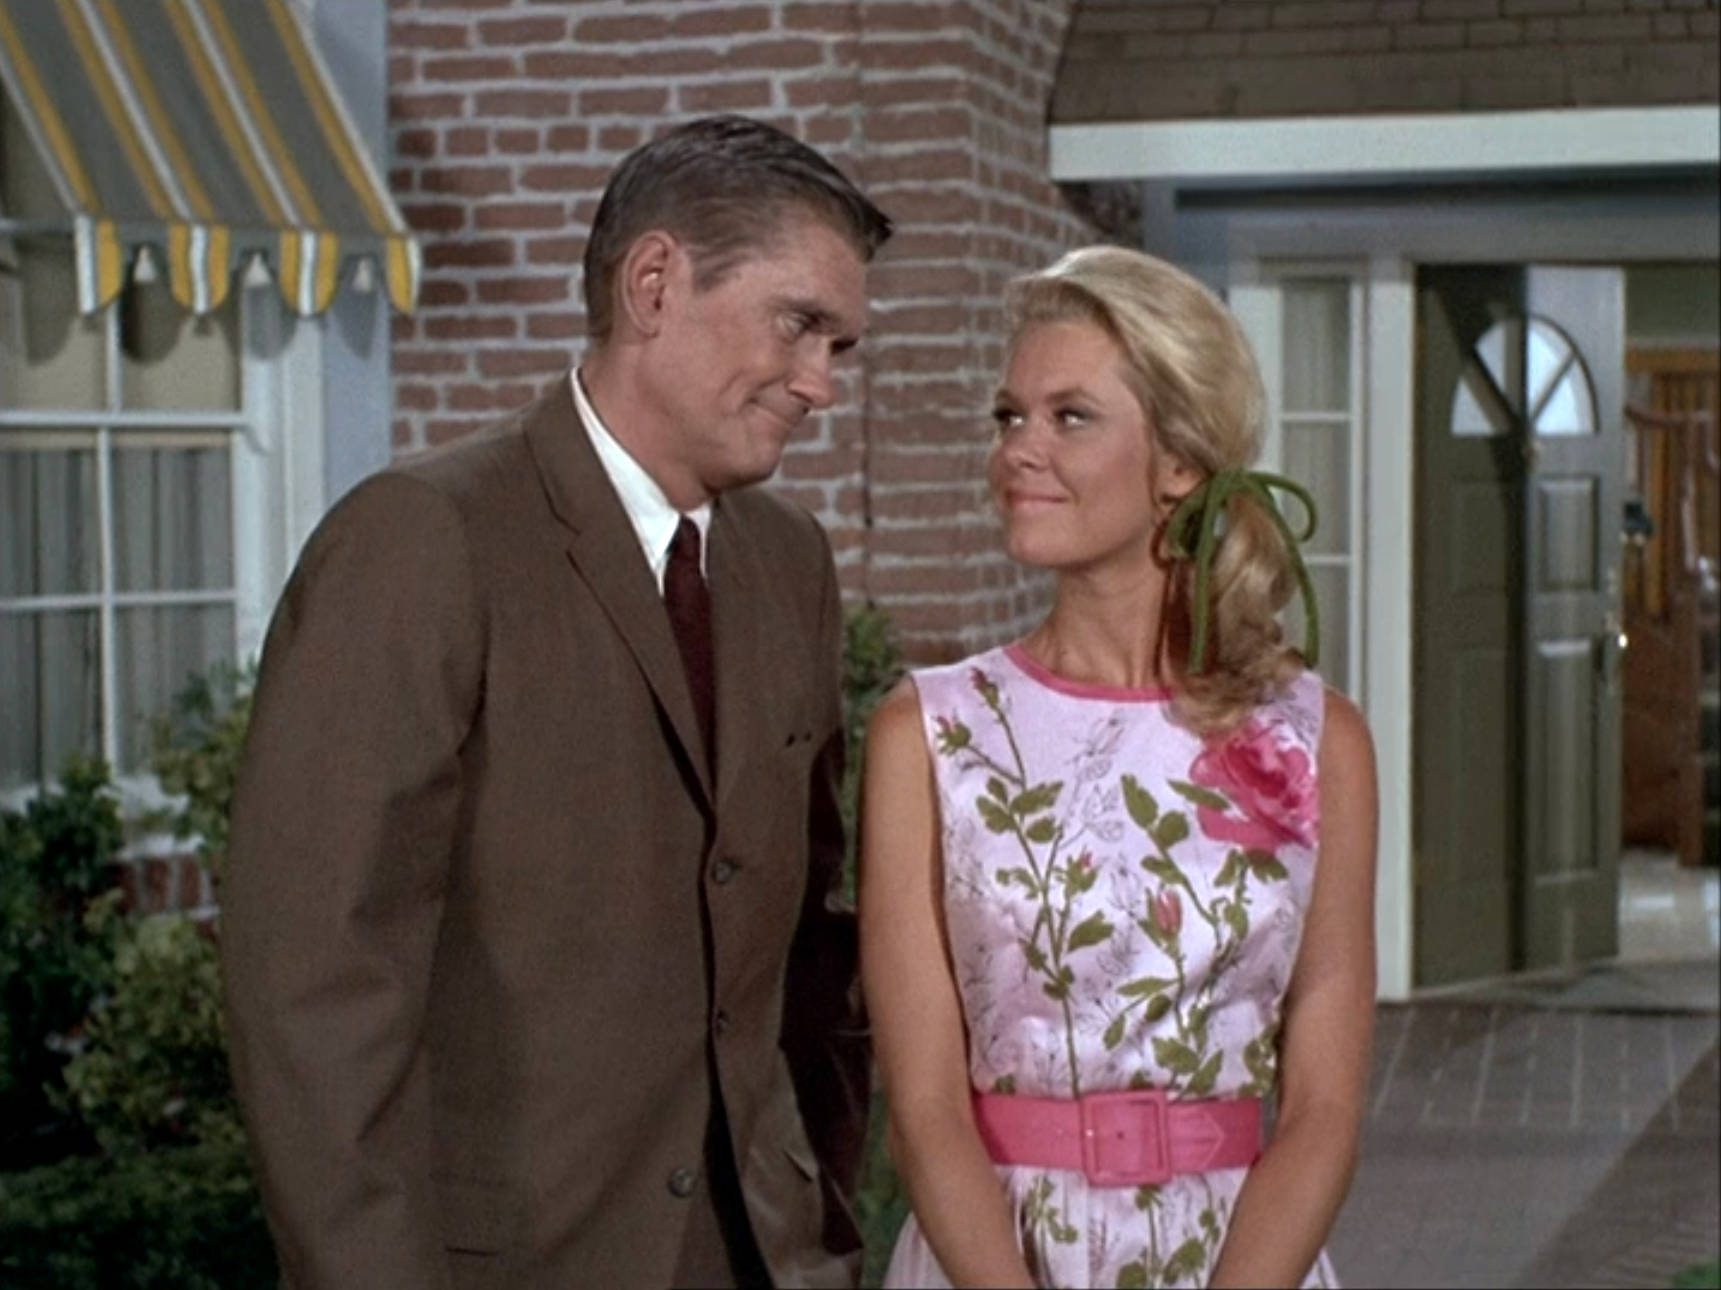 Charming Couple from Bewitched TV Show Wallpaper